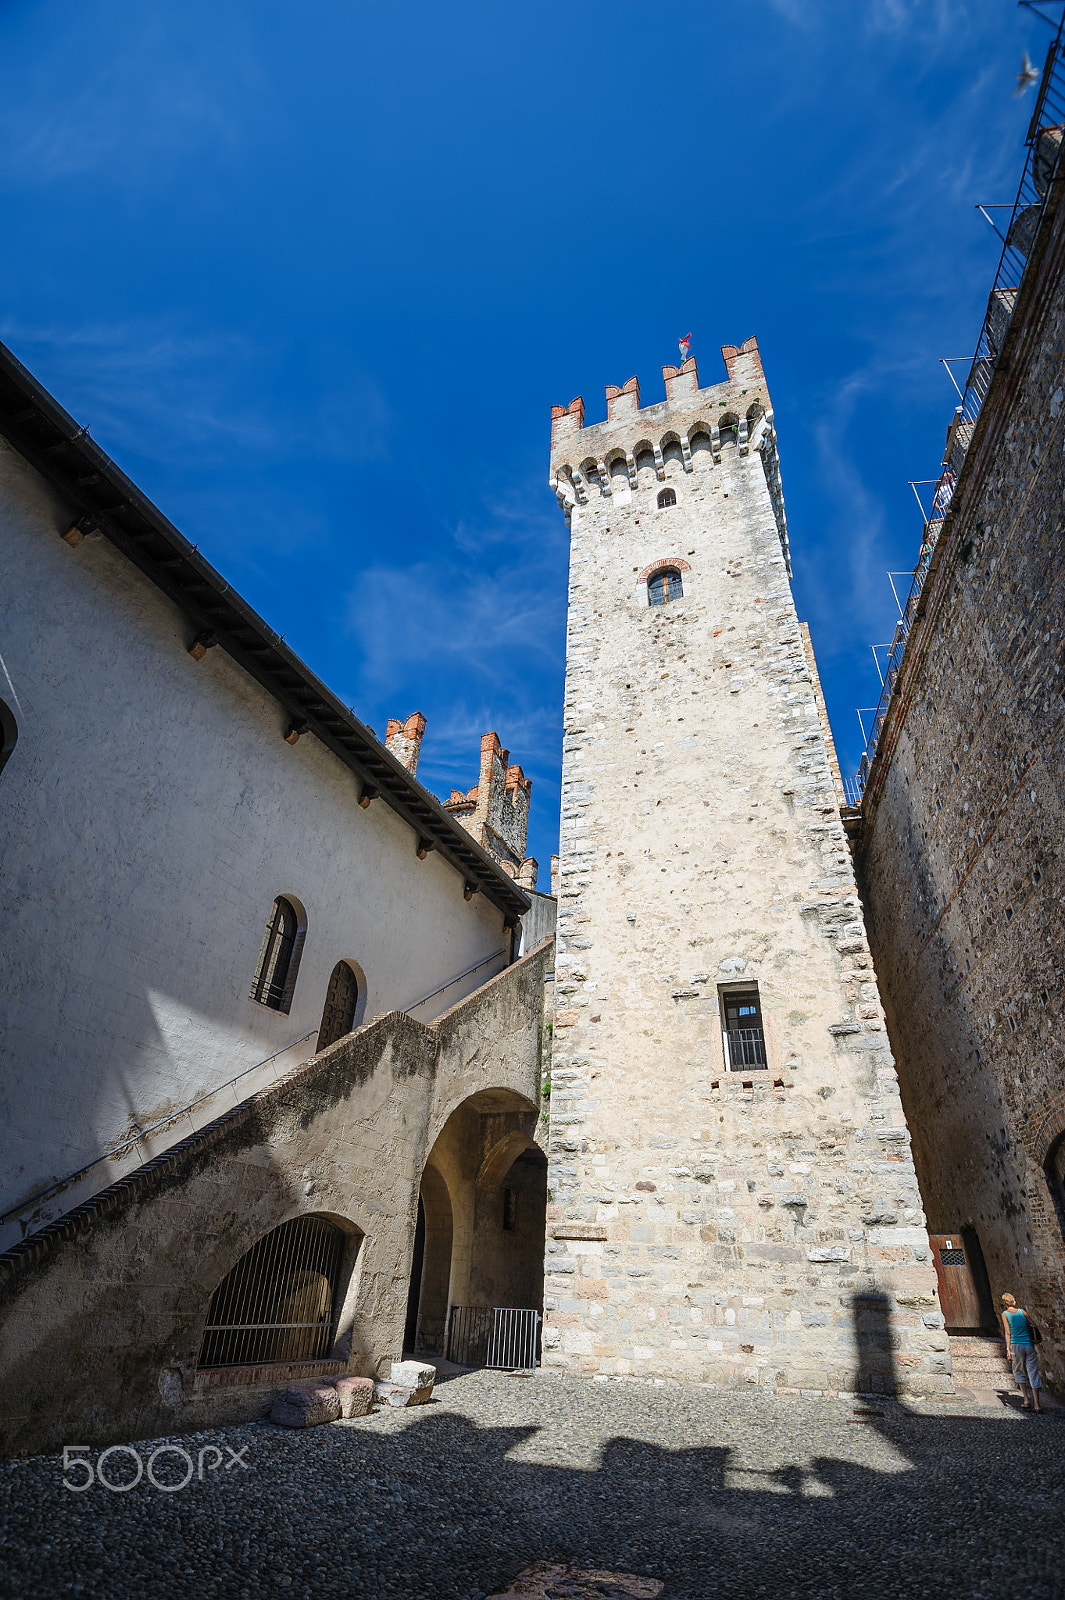 Nikon D700 + Nikon AF-S Nikkor 16-35mm F4G ED VR sample photo. Ineror court of medieval castle scaliger in old town sirmione on lake lago di garda, northern italy photography